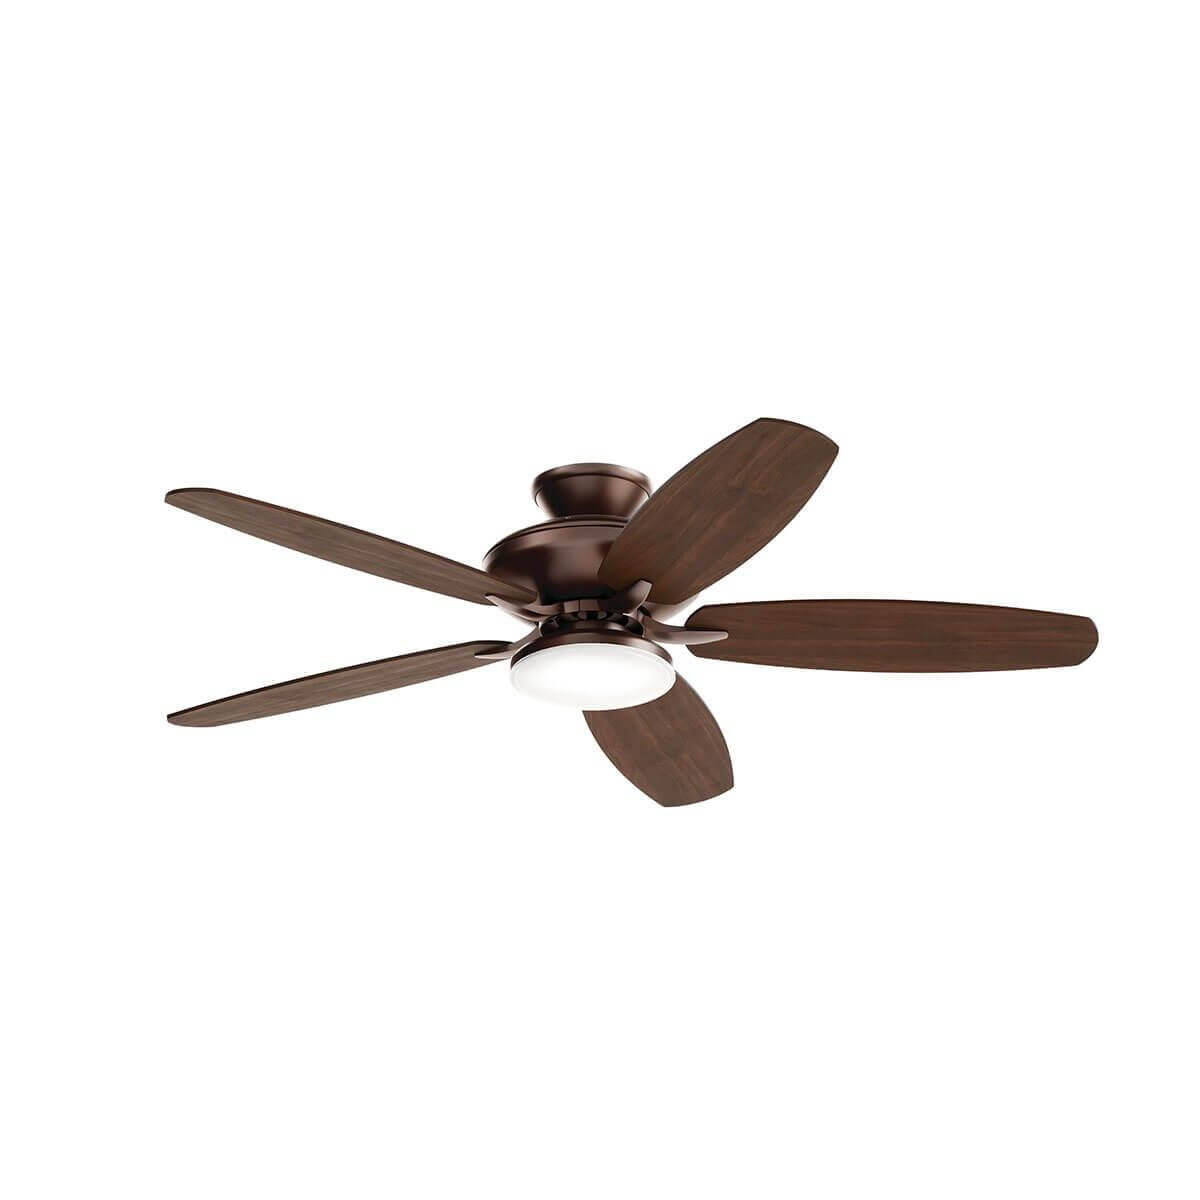 Kichler Renew 52 inch 5 Blade LED Ceiling Fan in Satin Natural Bronze with Walnut-Cherry Blade 330163SNB